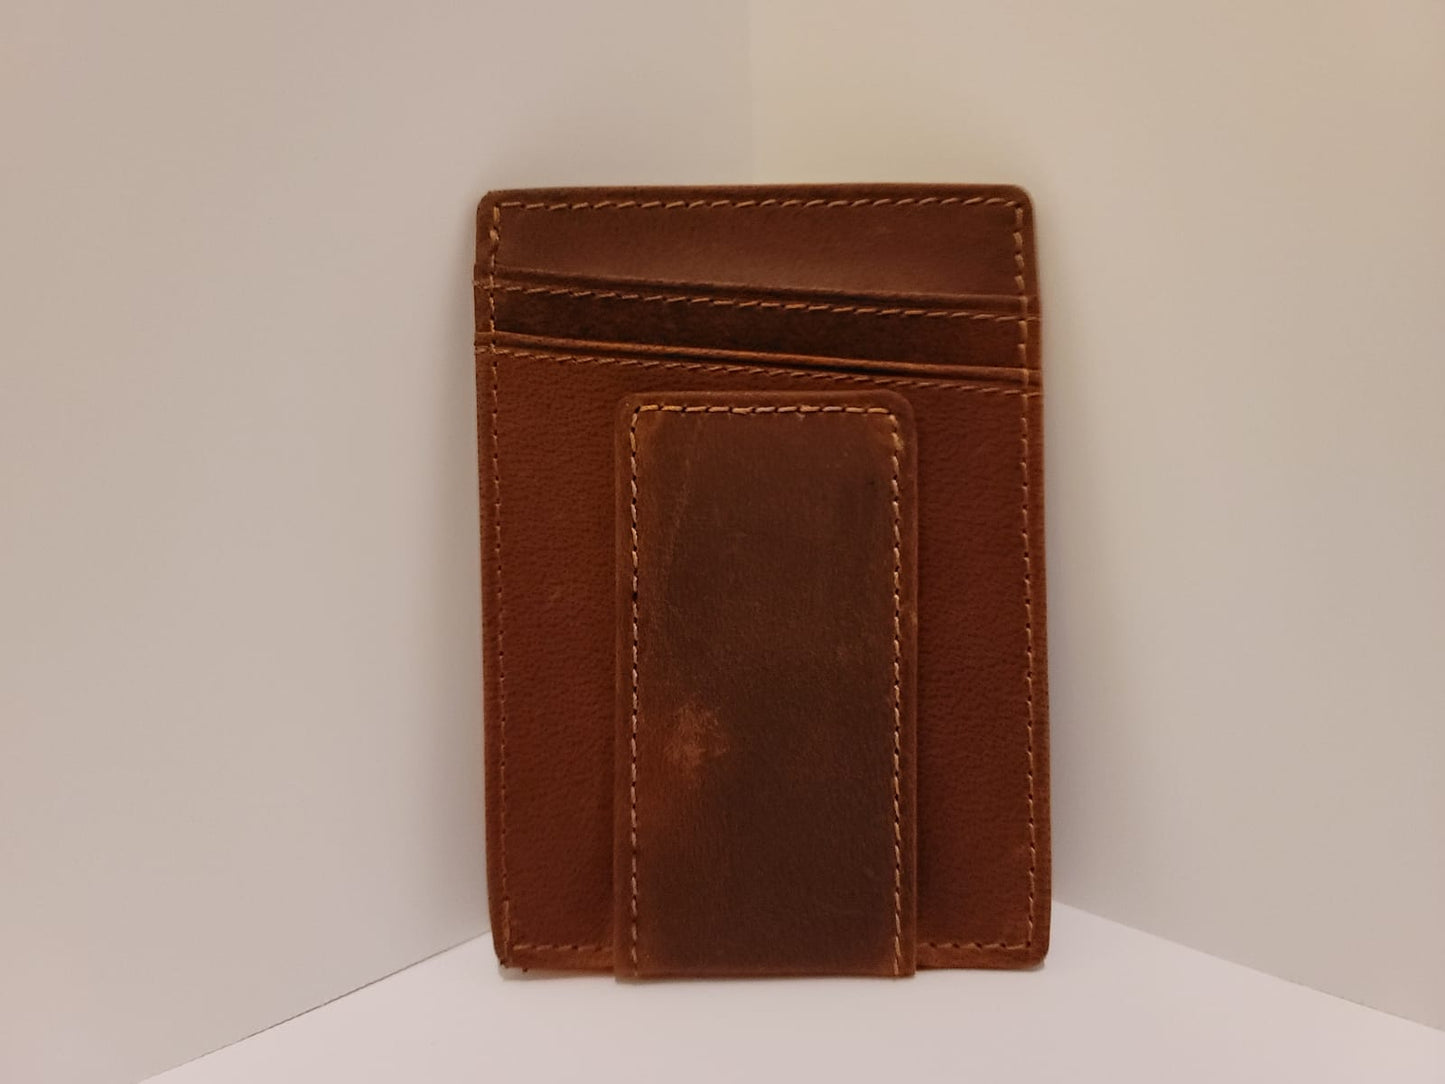 Wallet Clip Rugged Leather - marjan nyc inc